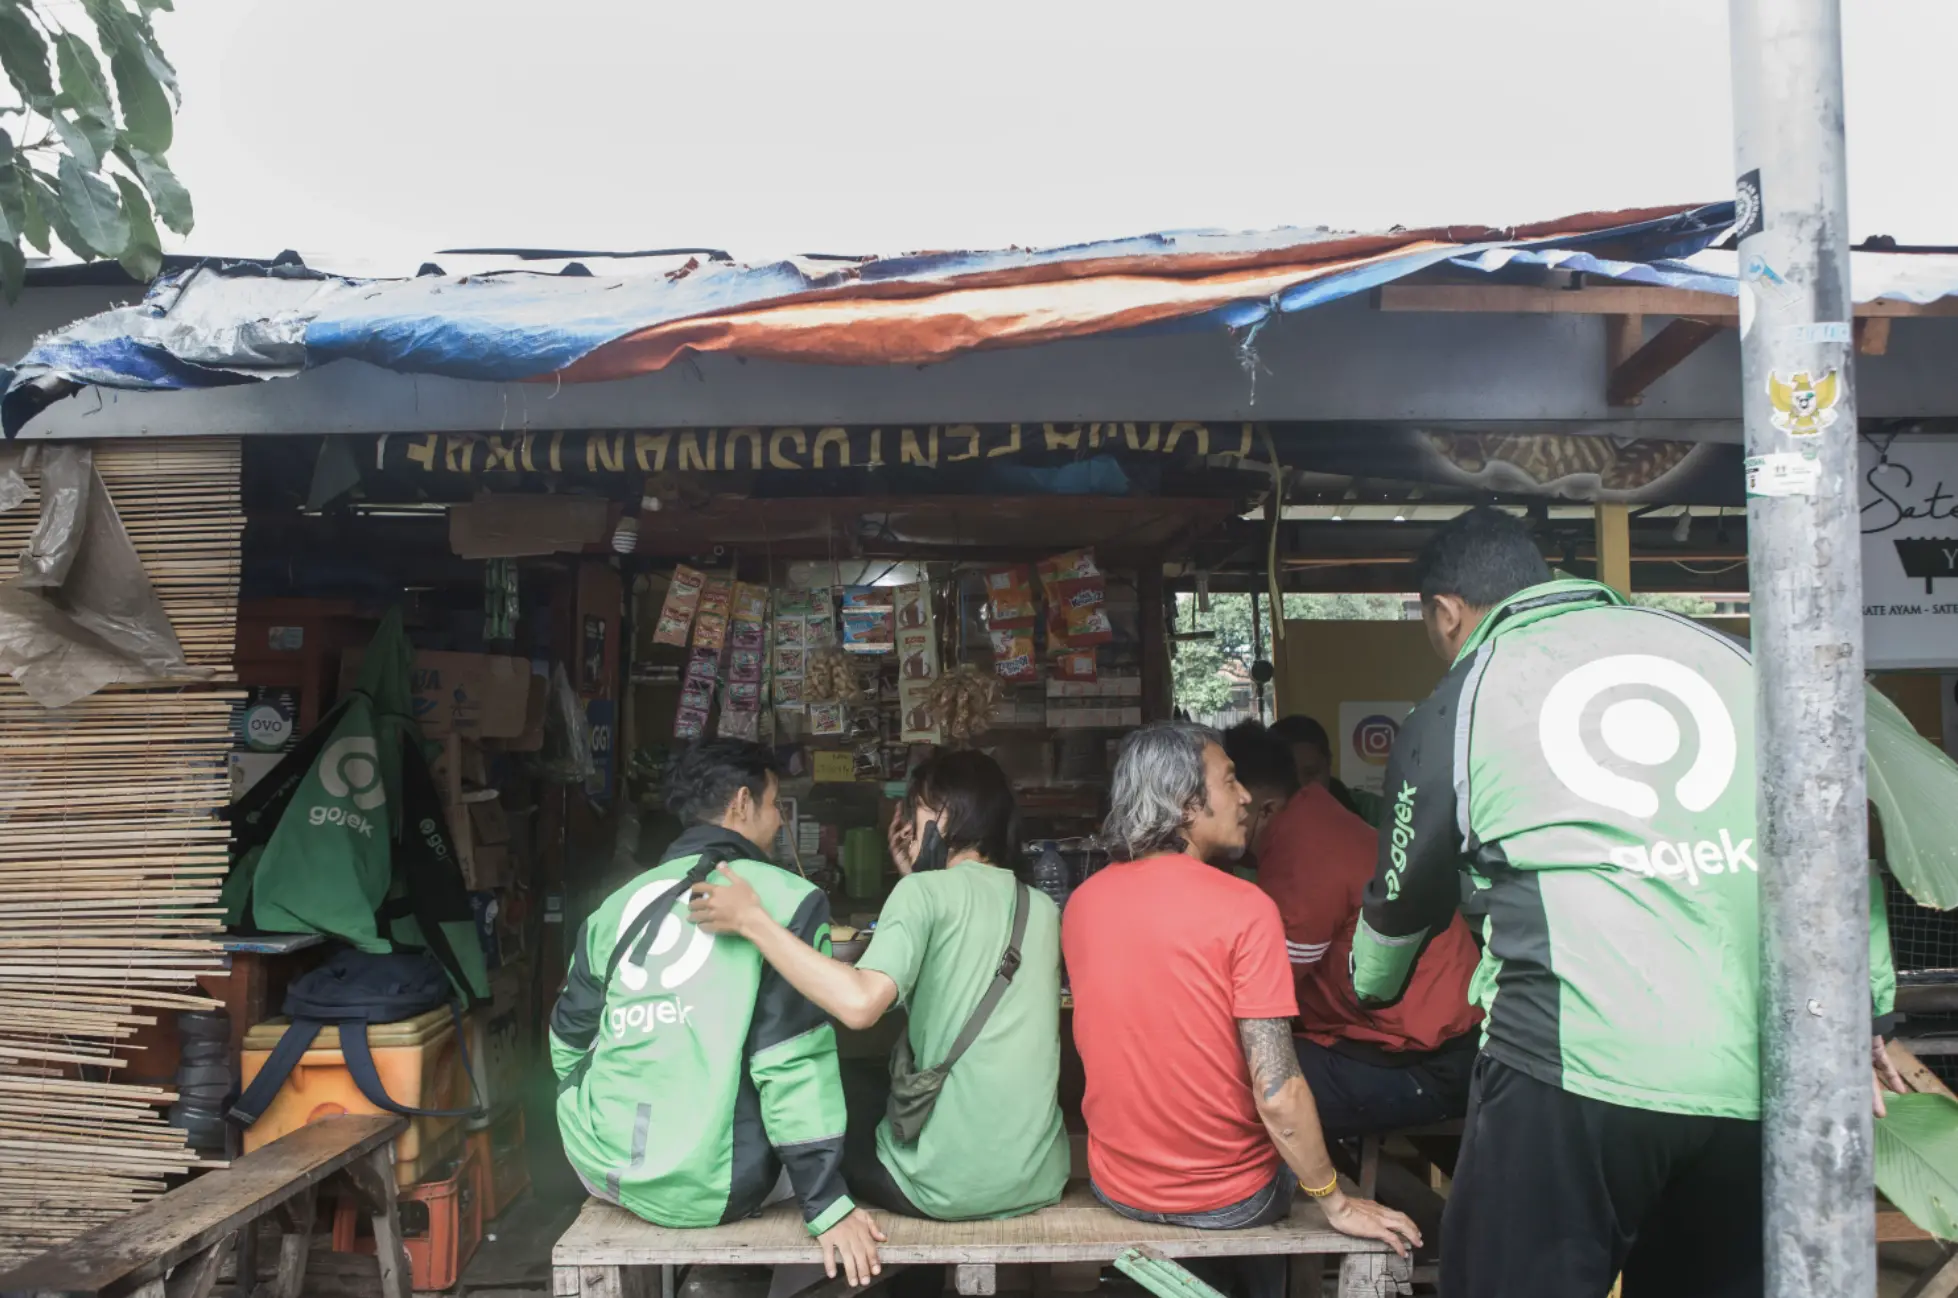 Delivery men in Indonesia sit at a stall